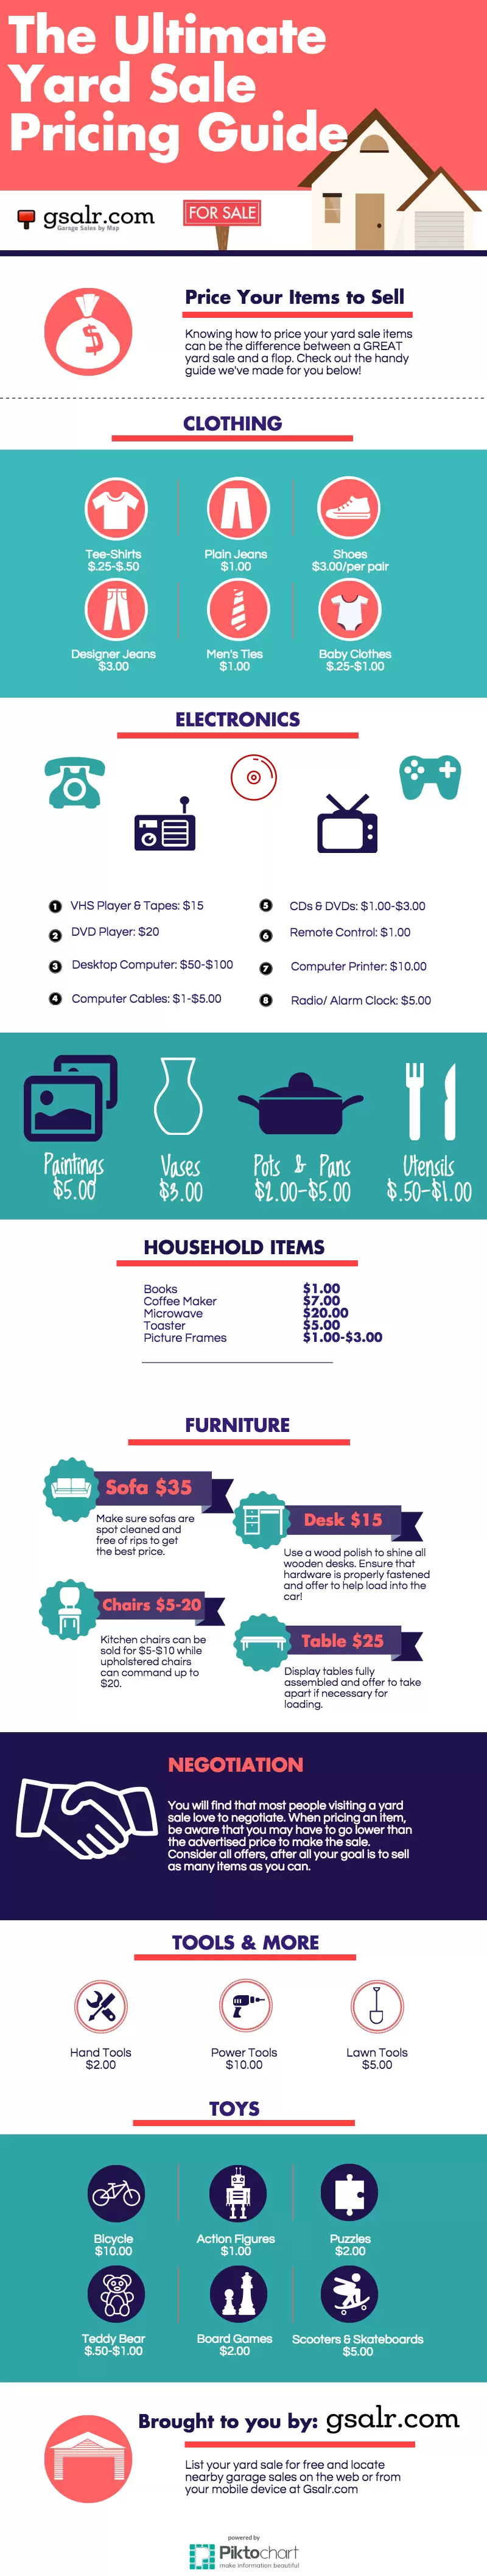 Yard Sale Pricing Guide